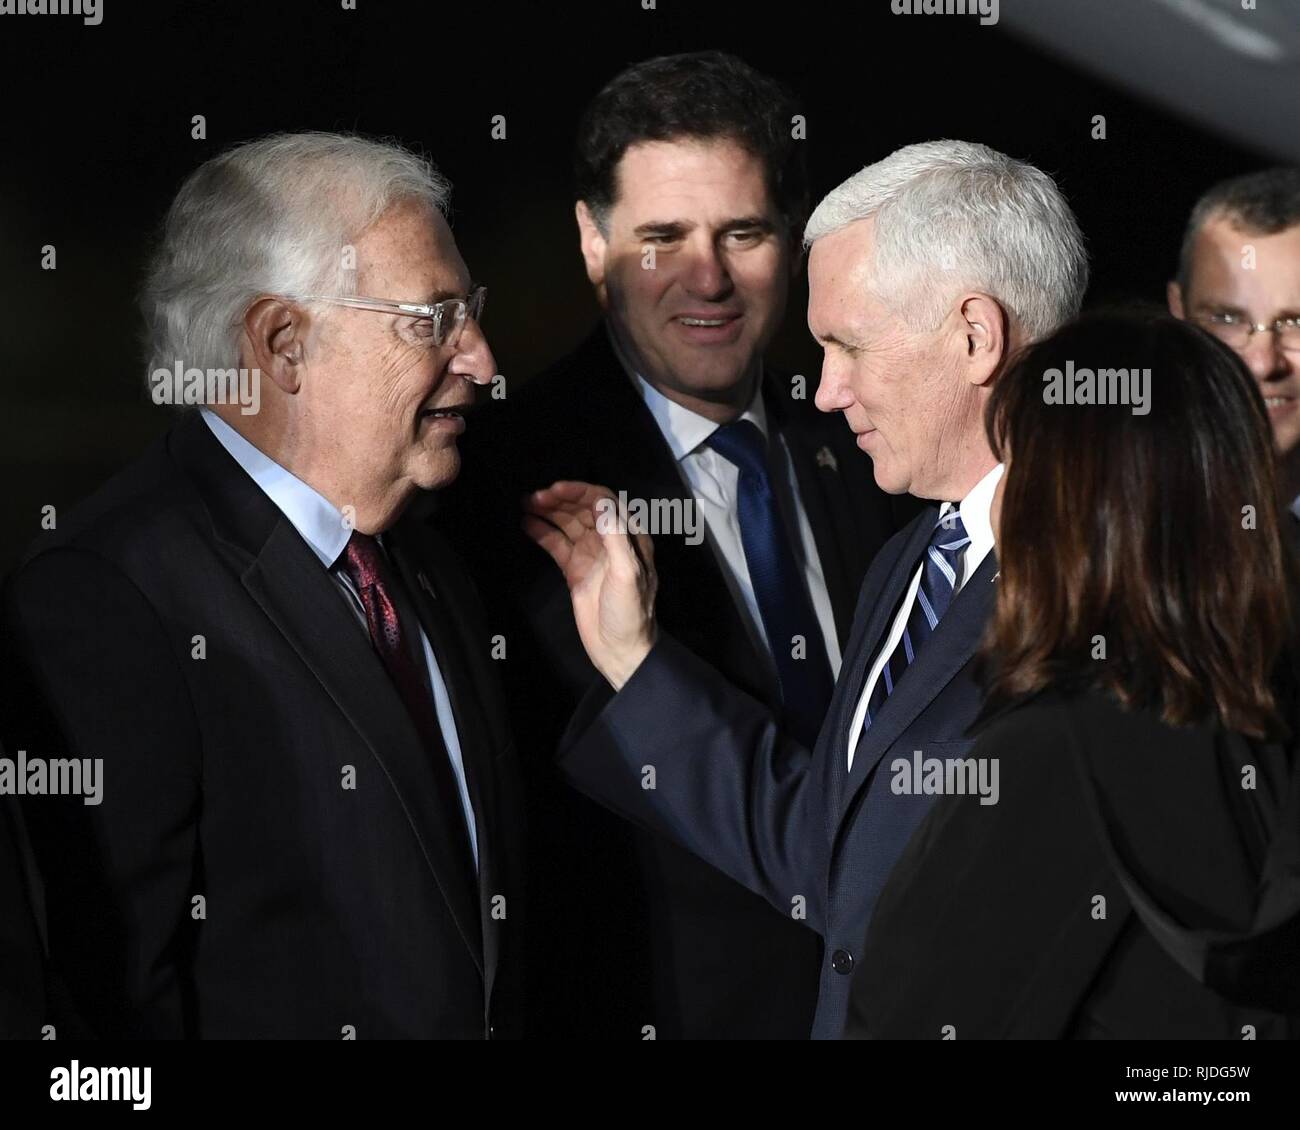 Vice President of the United States Mike Pence arrives at Israel’s Ben Gurion Airport, January 21, 2018, greeted by Head of Israeli Protocol, Ambassador Meron Reuben, Minister of Tourism Yariv Levin, Israeli Ambassador to the U.S., Ron Dermer, and U.S. Ambassador to Israel David Friedman. Stock Photo